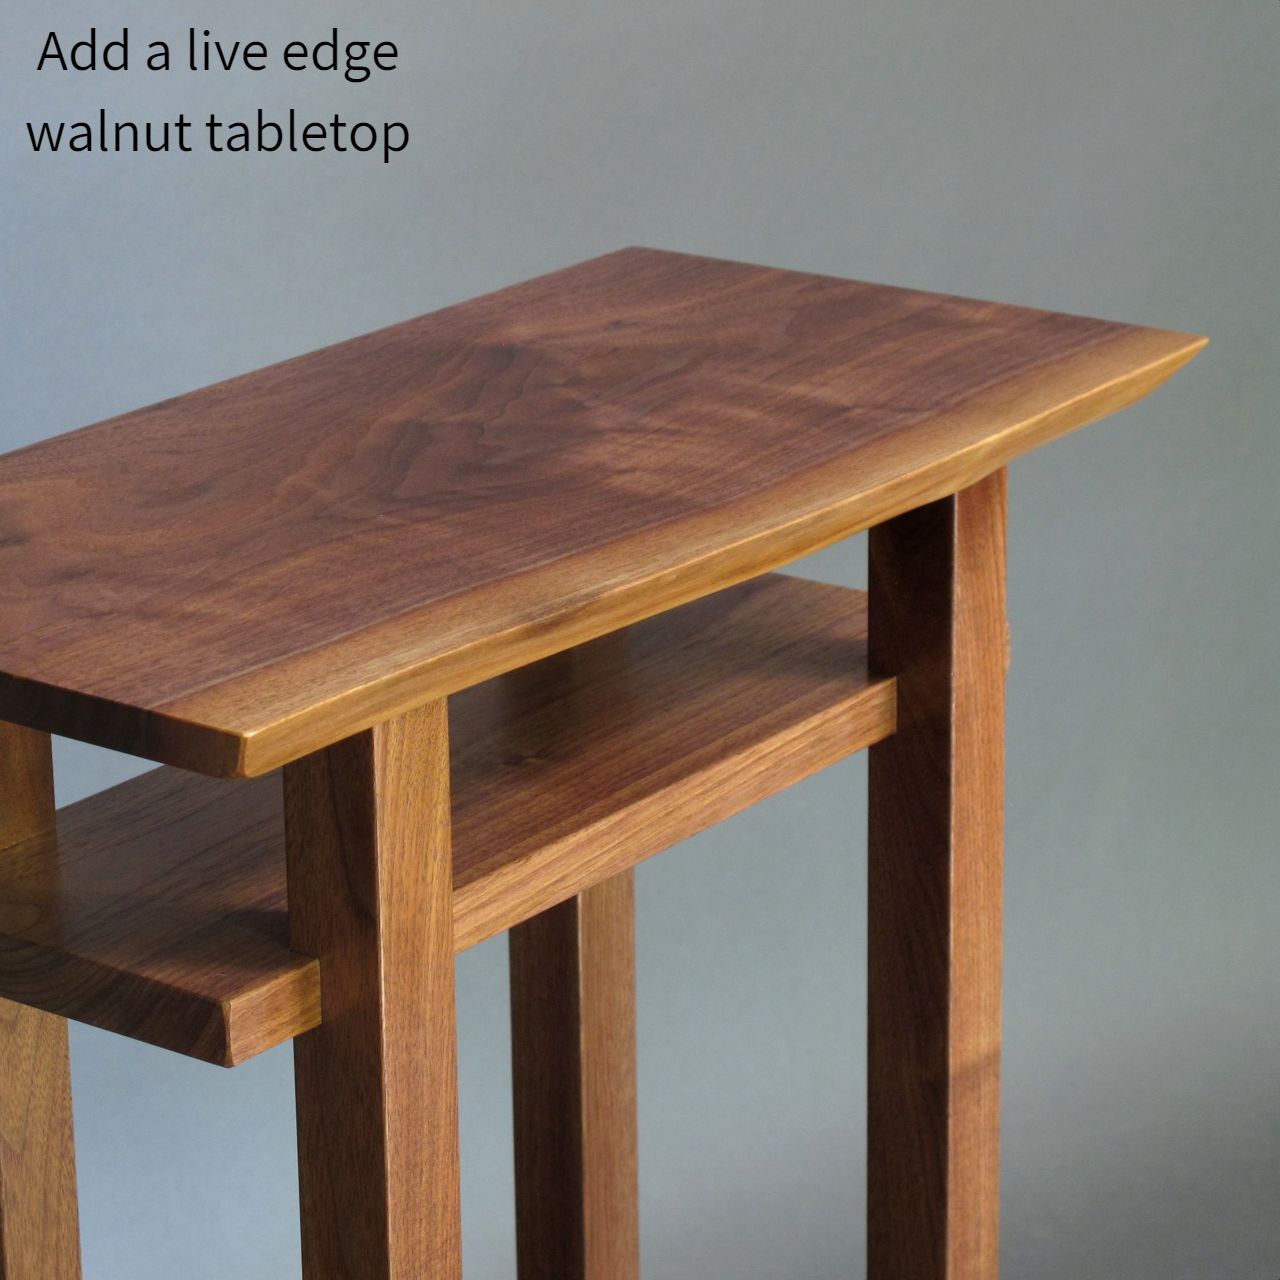 Add a live edge table top to your walnut entry table at Mokuzai Furniture